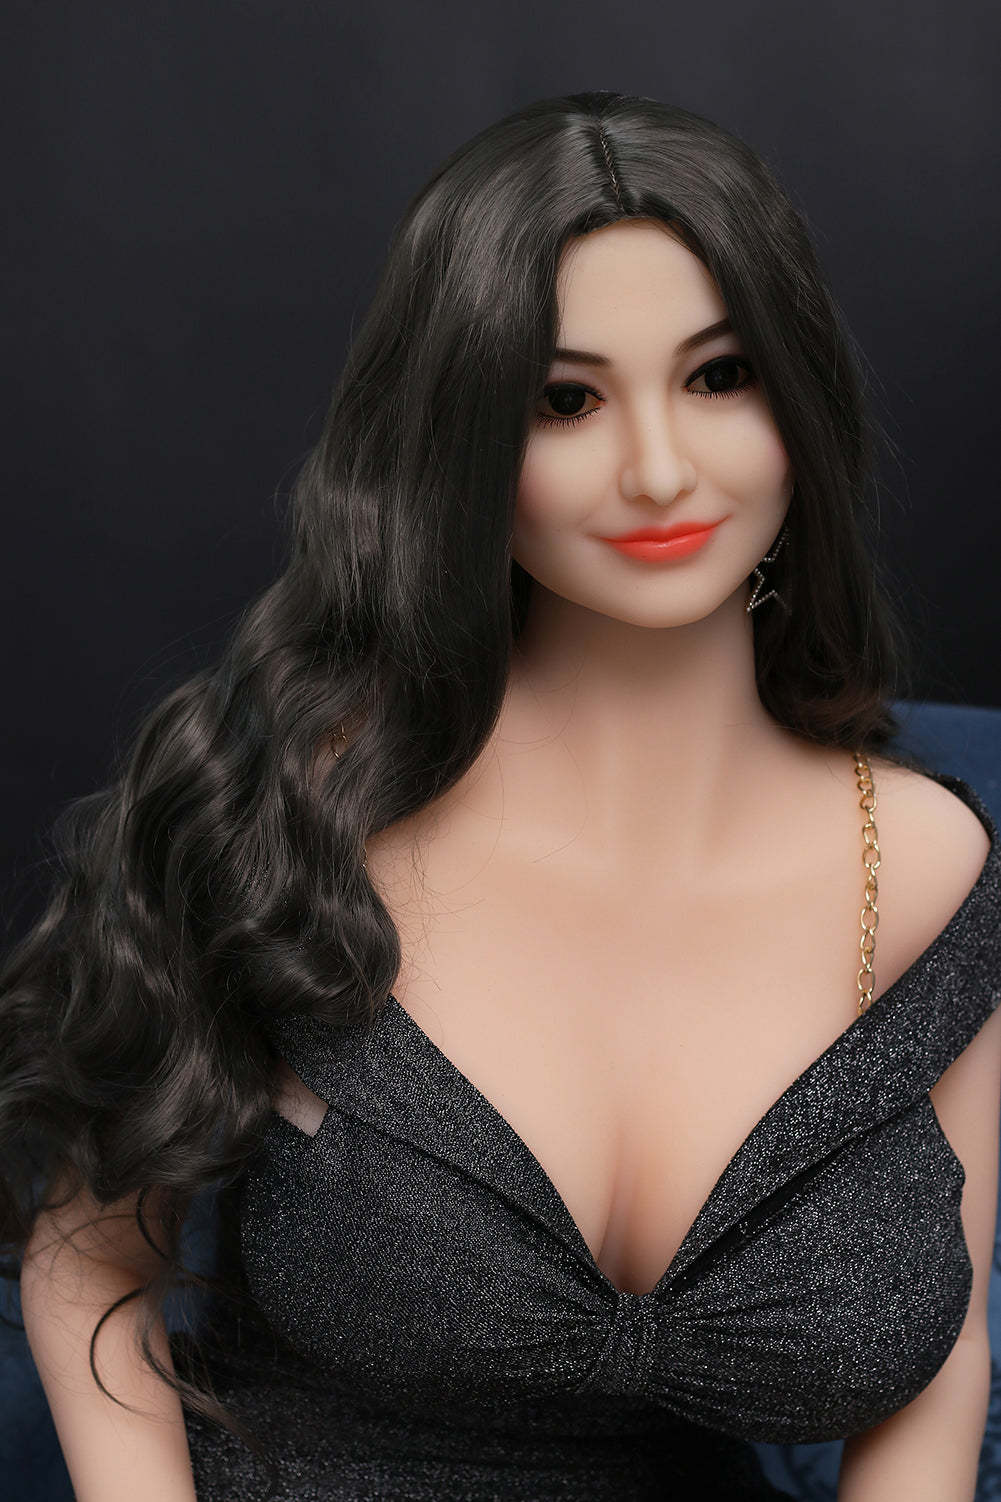 Quintina-5 ft 4 in / 162 cm Charming Sex Doll